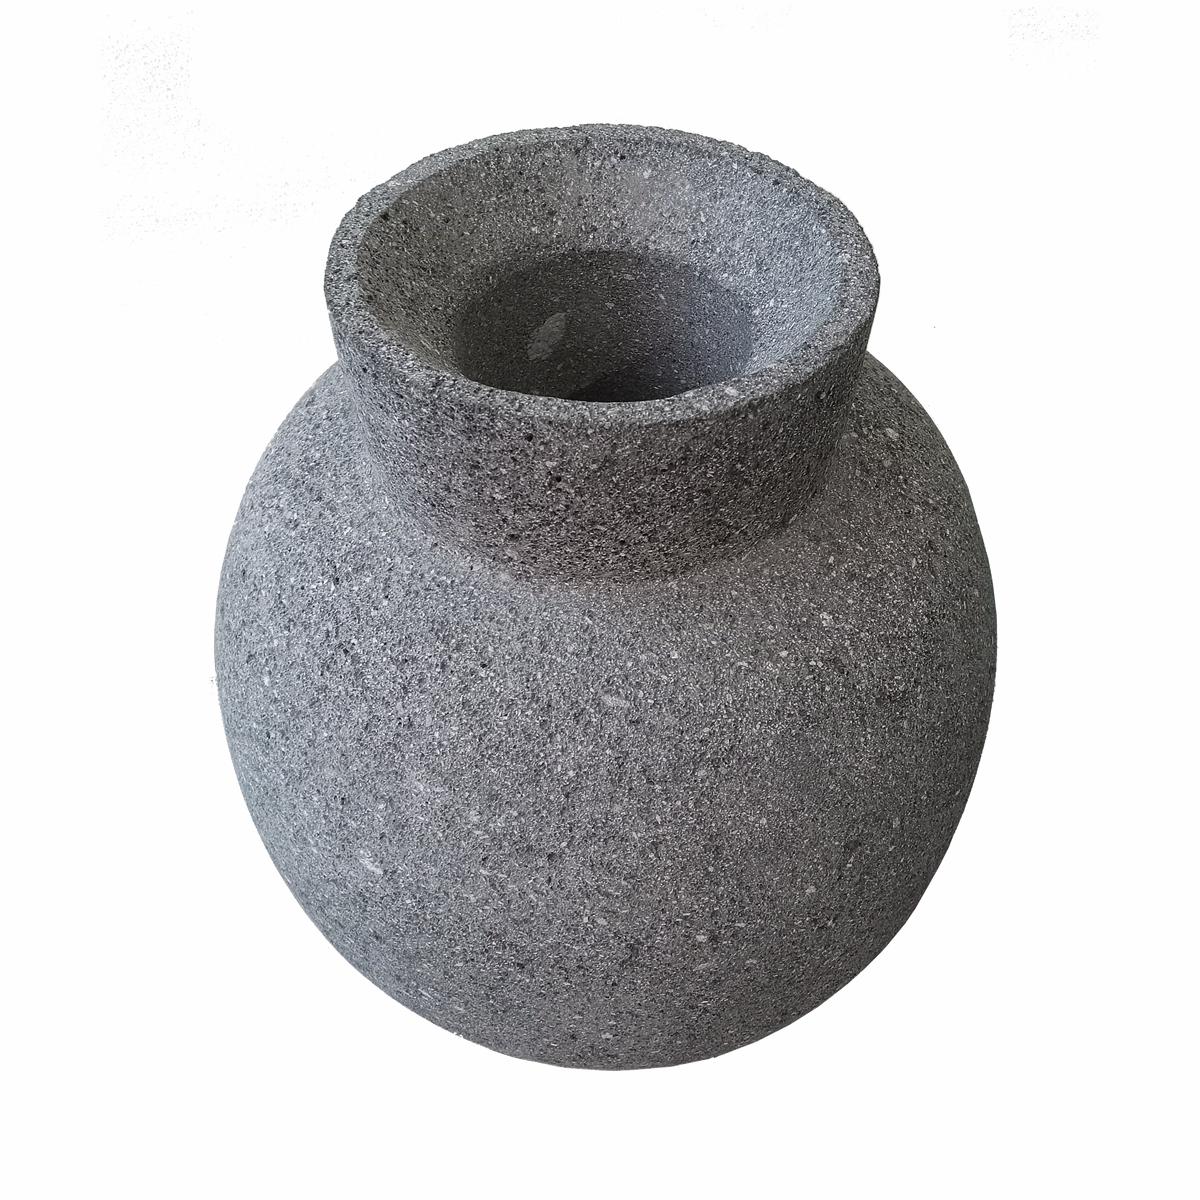 A dark lava stone vase or jar in an oval shape, and narrow top, hand-crafted in Mexico. An organic modern accent to home décor, in the kitchen, living room or any other area, indoors or outdoors. Its softly rounded edges make the rough texture of